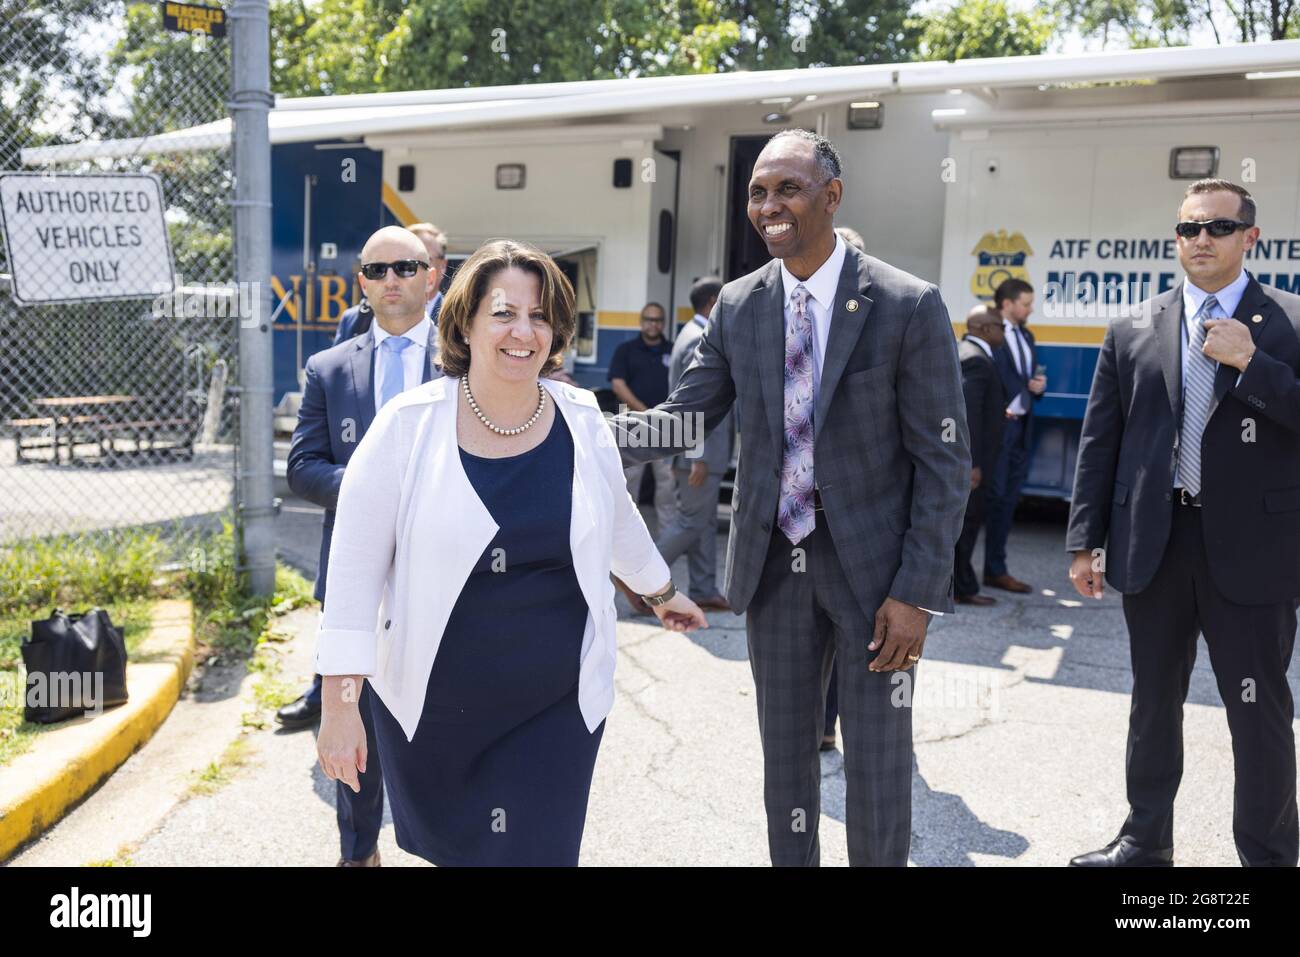 US Deputy Attorney General Lisa Monaco (L) and Acting Alcohol, Tobacco and Firearms (ATF) Director Marvin G. Richardson (C-R) depart after visiting an ATF crime gun intelligence mobile command center (MCC), which provides investigators with ballistic processing at crime scenes, in Washington, DC on July 22, 2021. The strike forces will seek to reduce firearms trafficking corridors, with a focus on New York, Chicago, Los Angeles, the San Francisco Bay and Sacramento Region, and Washington, DC. Pool Photo by Jim Lo Scalzo/UPI Stock Photo